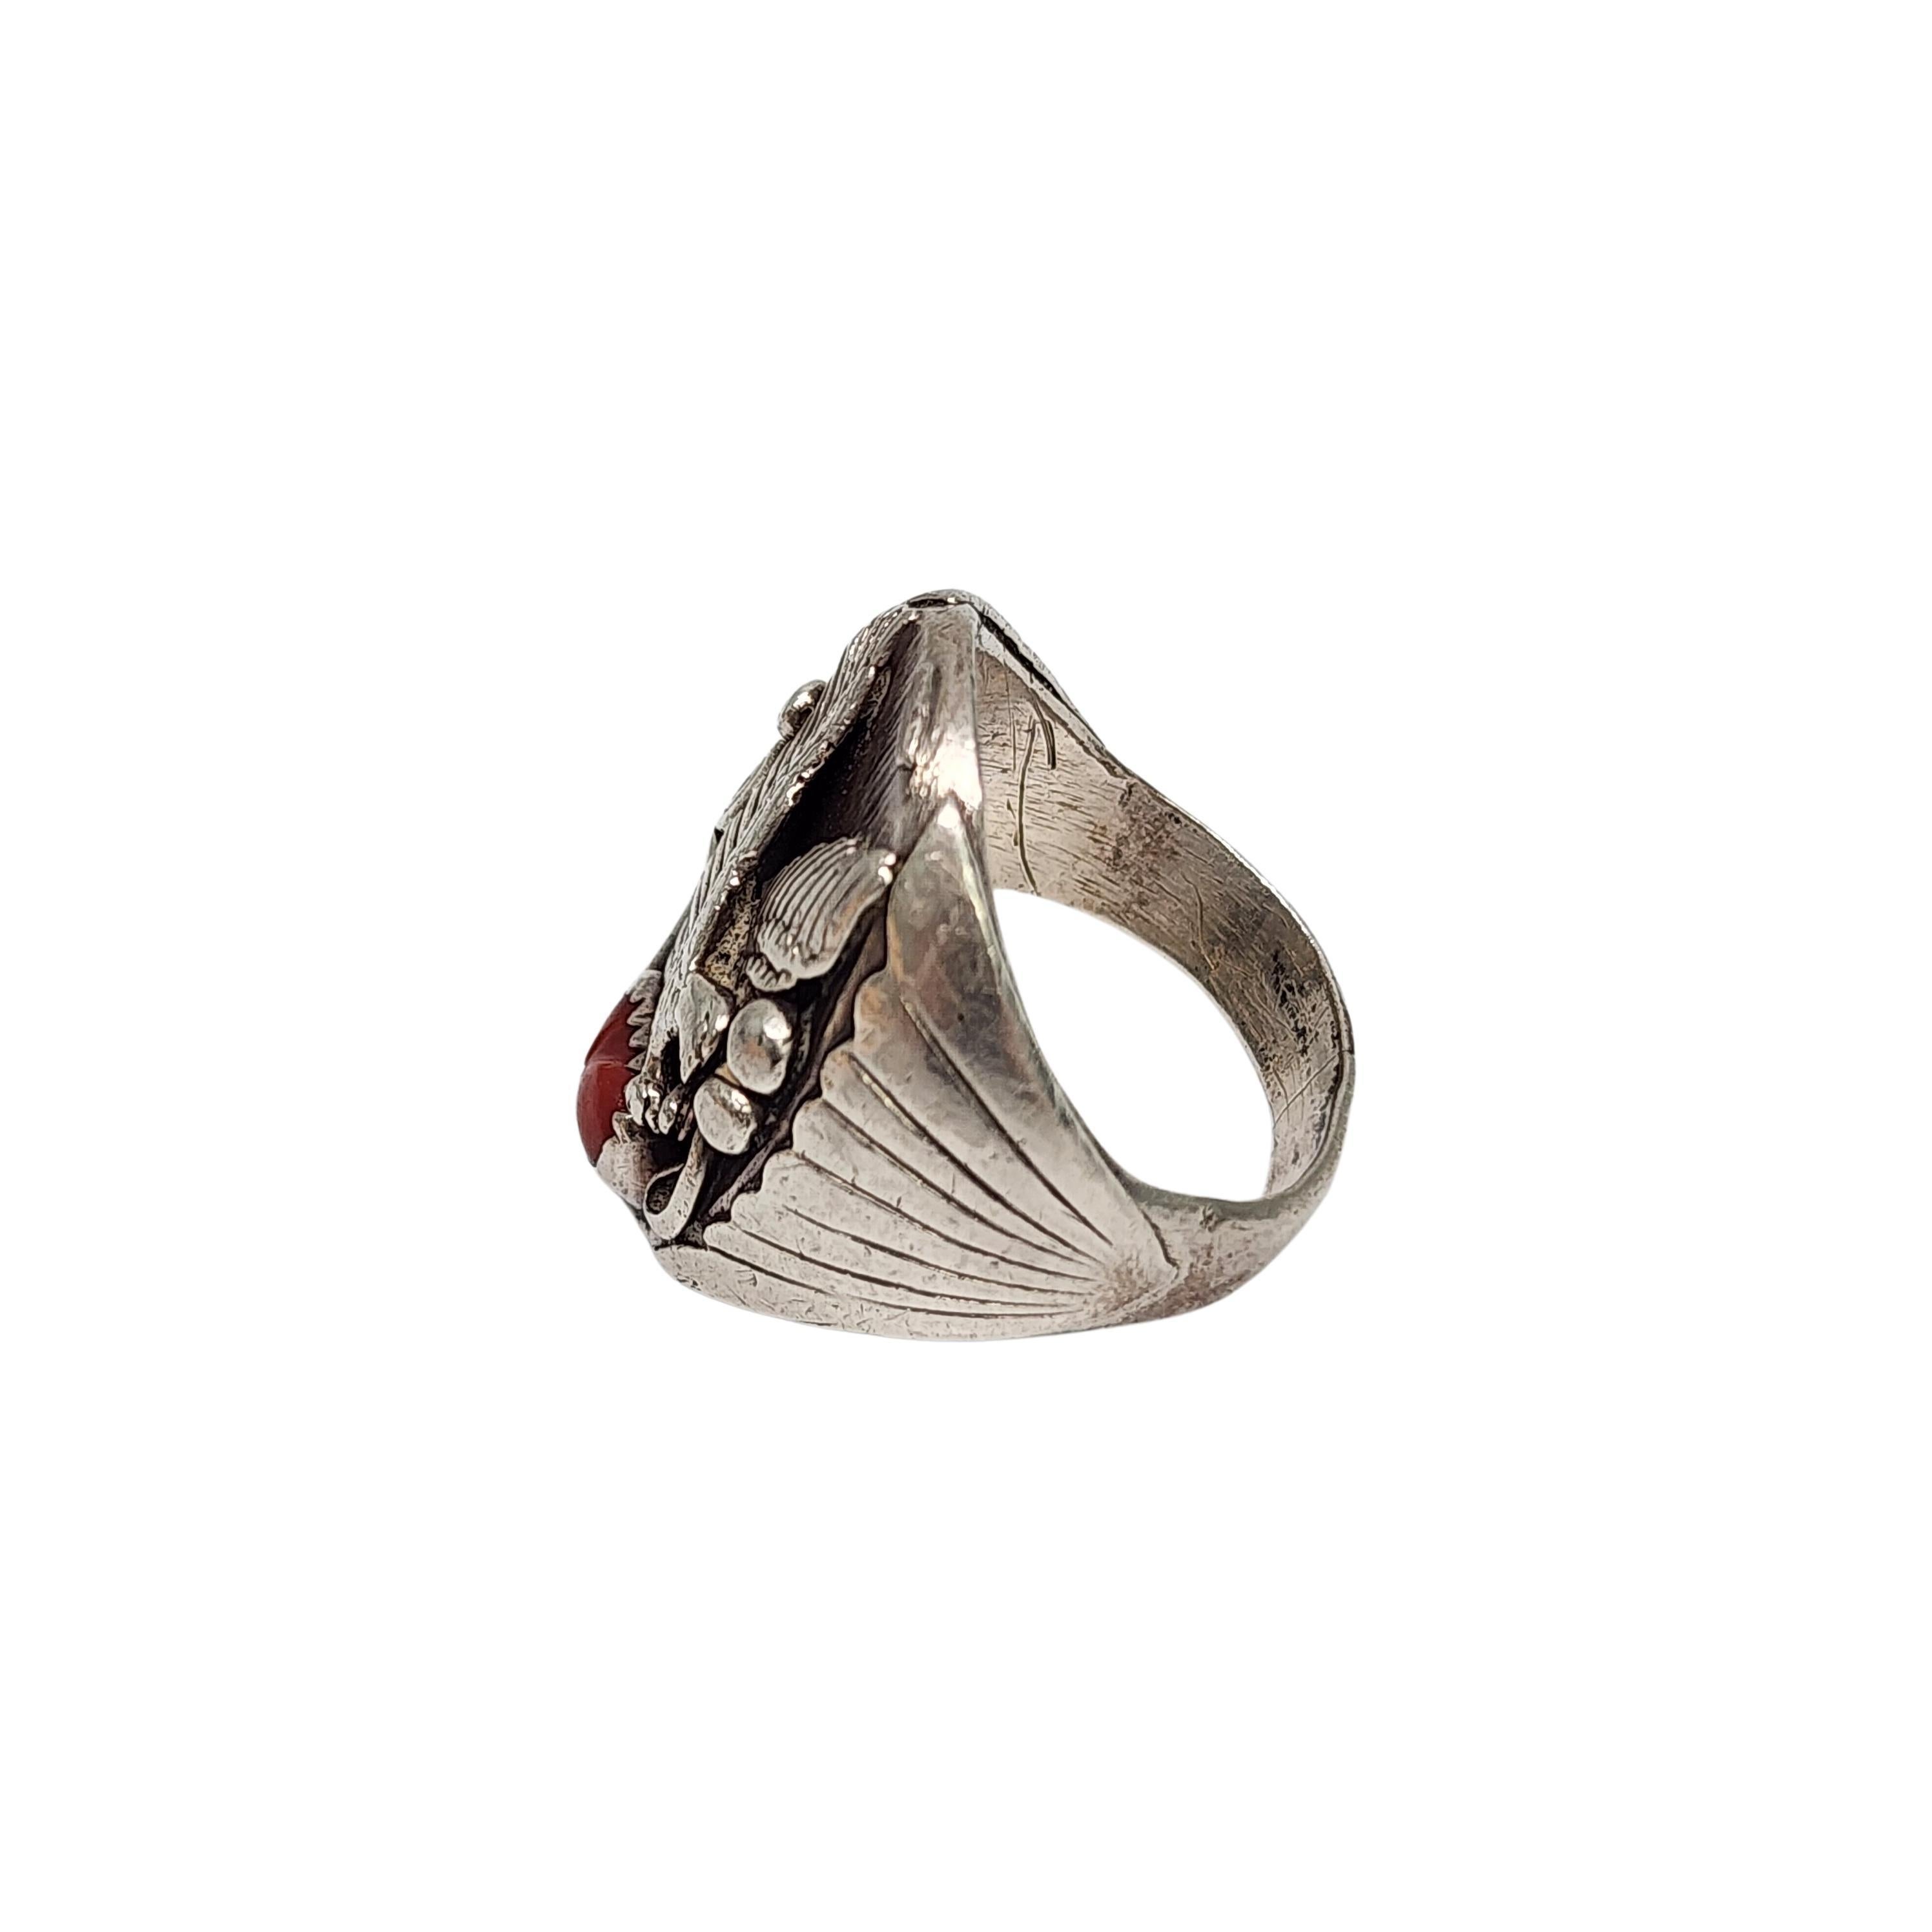 Sterling silver and coral ring by Native American artisan Richard Begay.

Size 10 1/2

This sterling silver ring features a flying eagle with a red coral stone in a saw tooth bezel setting.

Weighs approx 20.3g, 13.0dwt

1 1/8